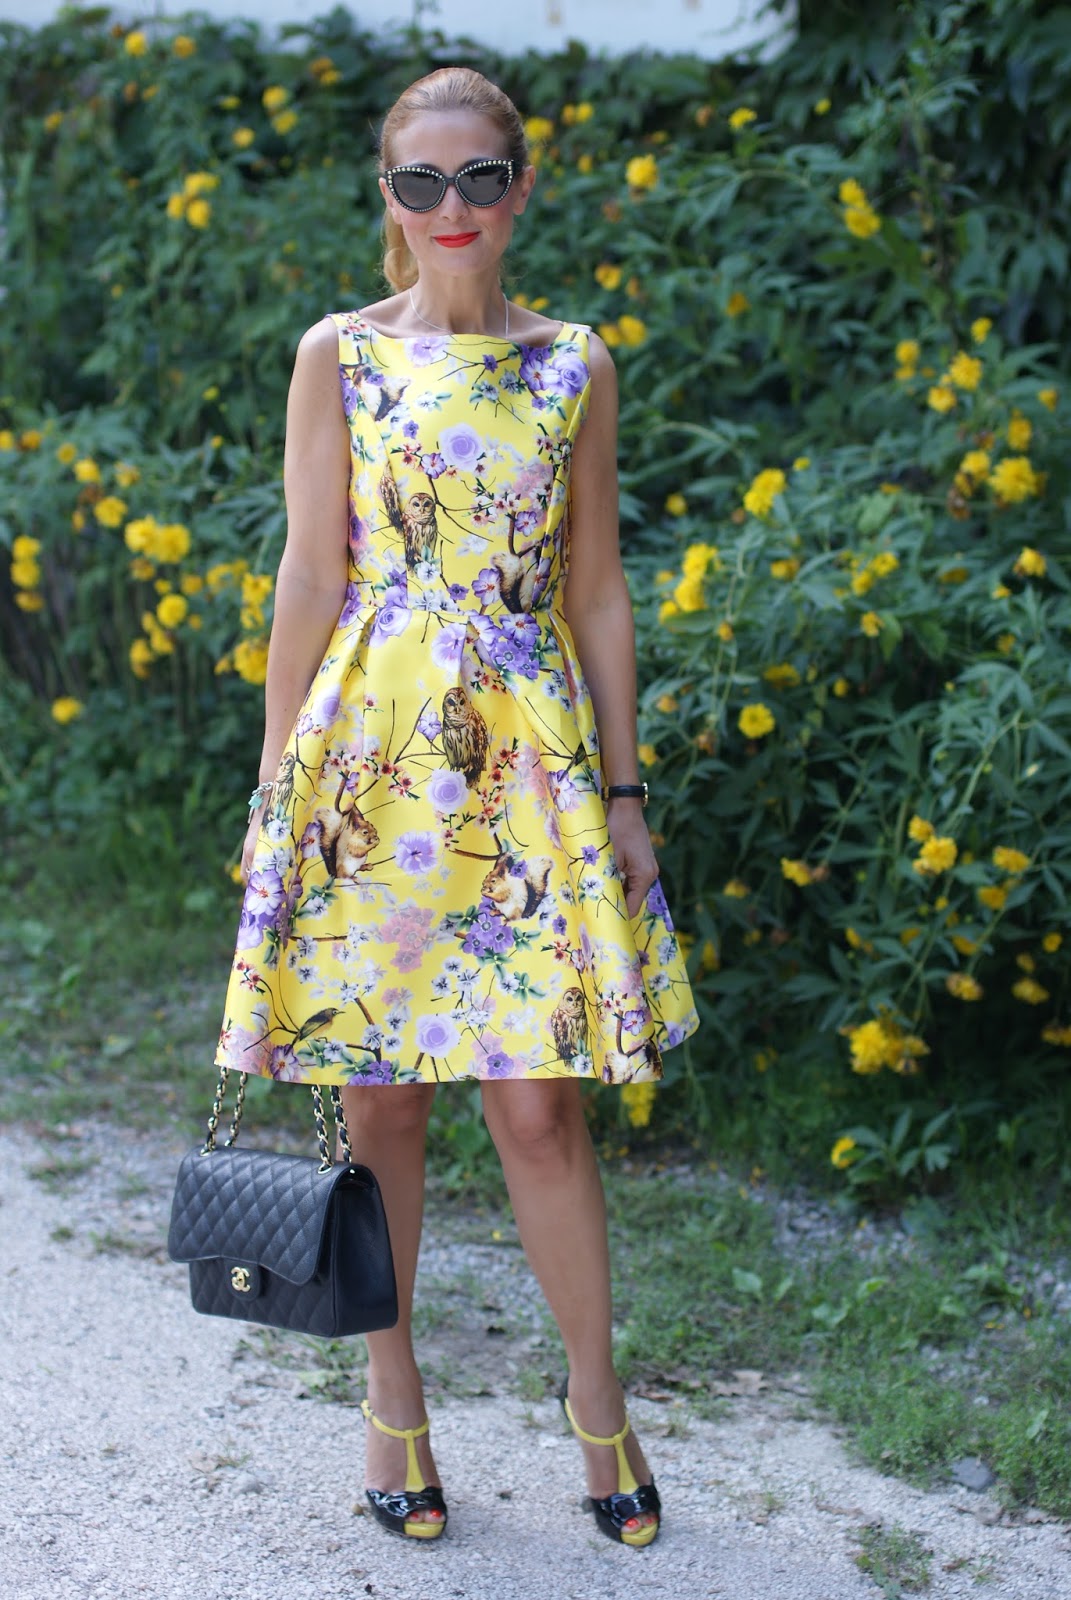 Fashion blogger meets ducks: girly and chic outfit | Fashion and ...